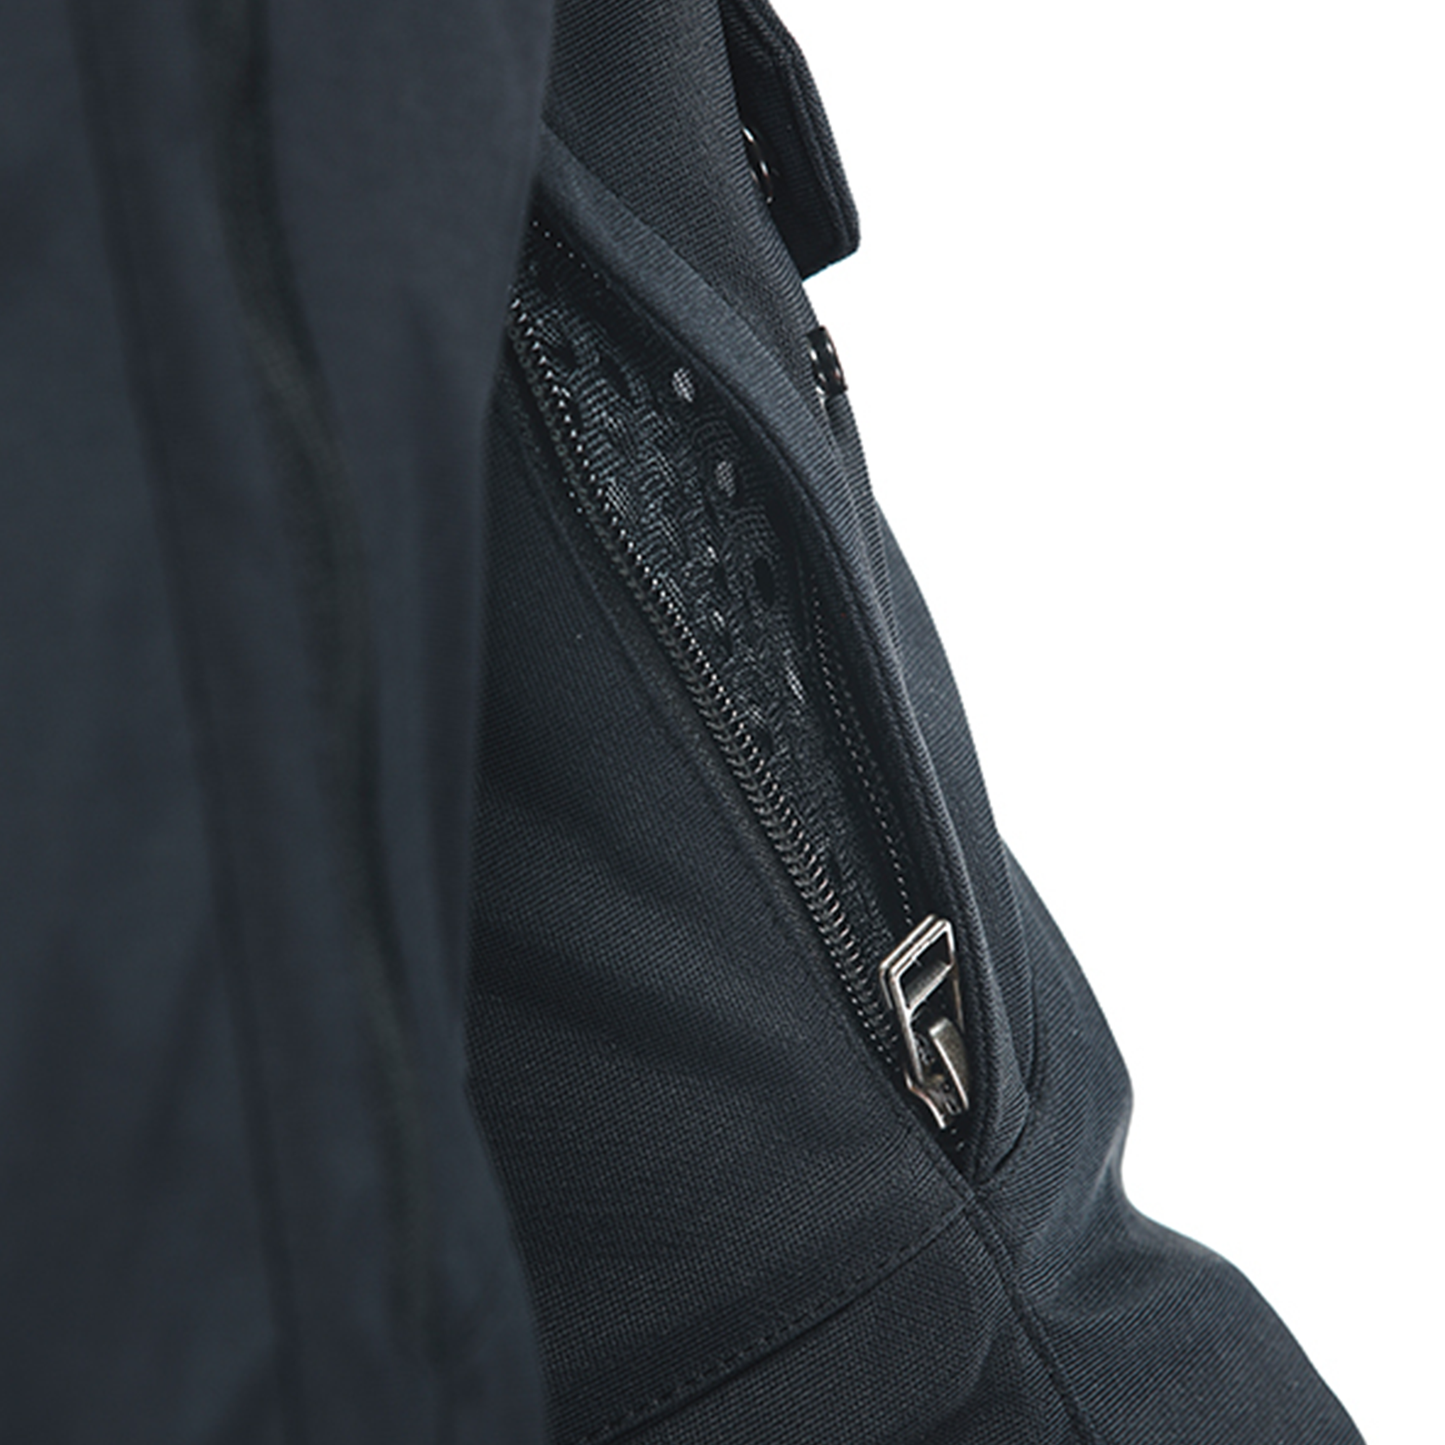 Dainese Carve Master 3 Gore-Tex Jacket - Y21